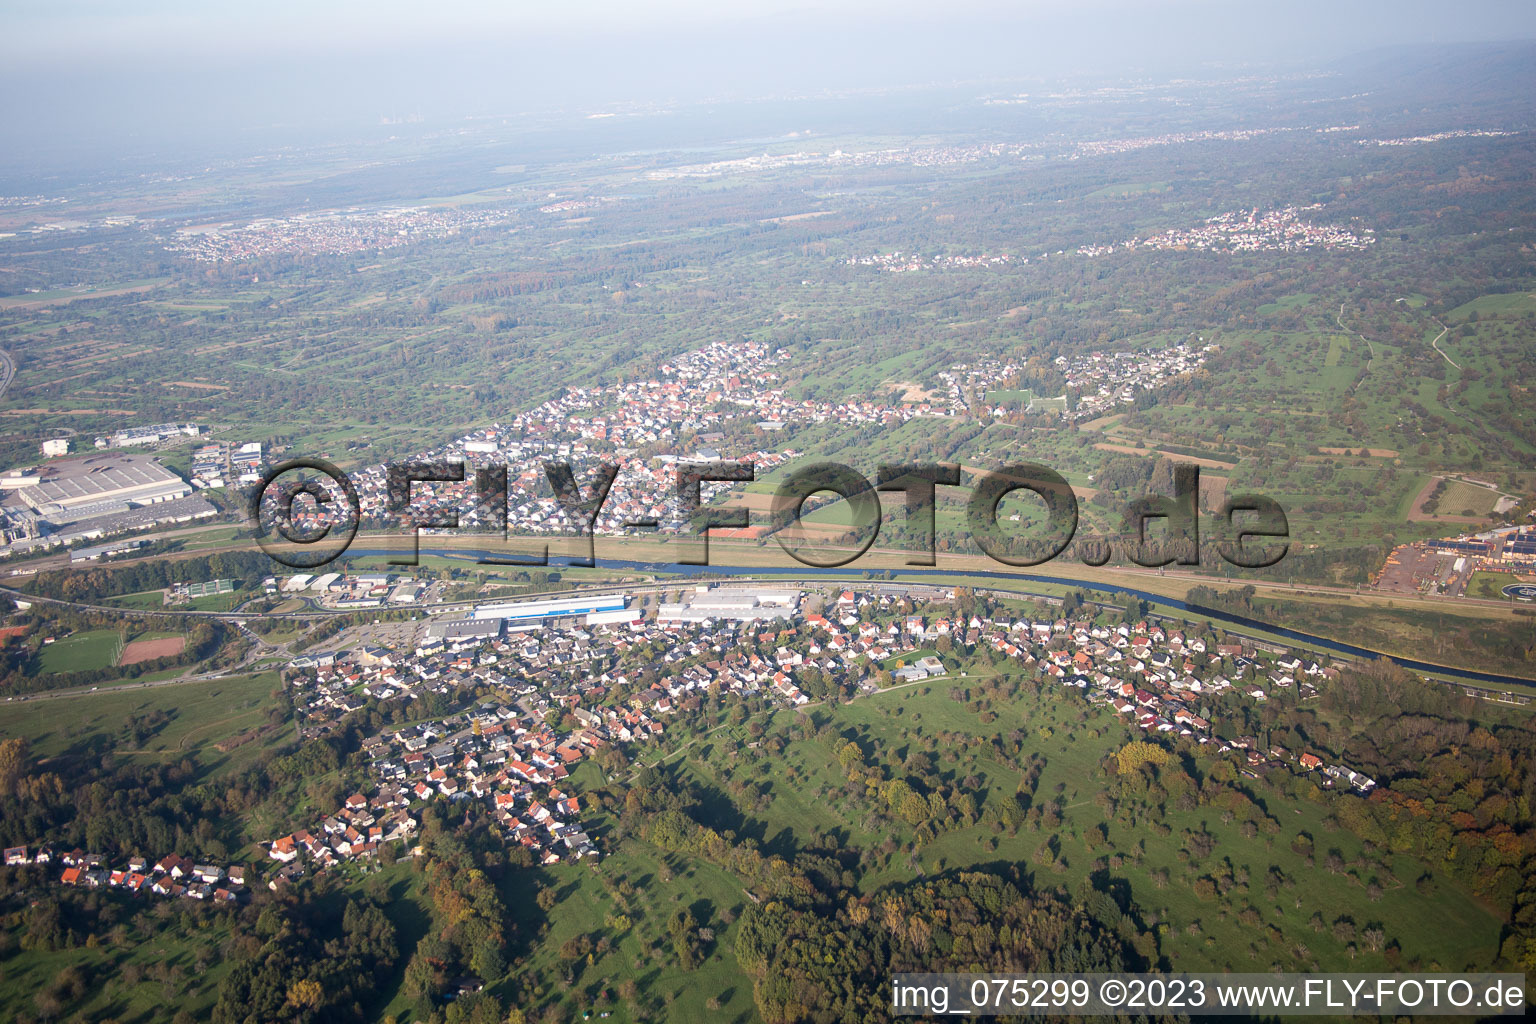 Kuppenheim in the state Baden-Wuerttemberg, Germany from above